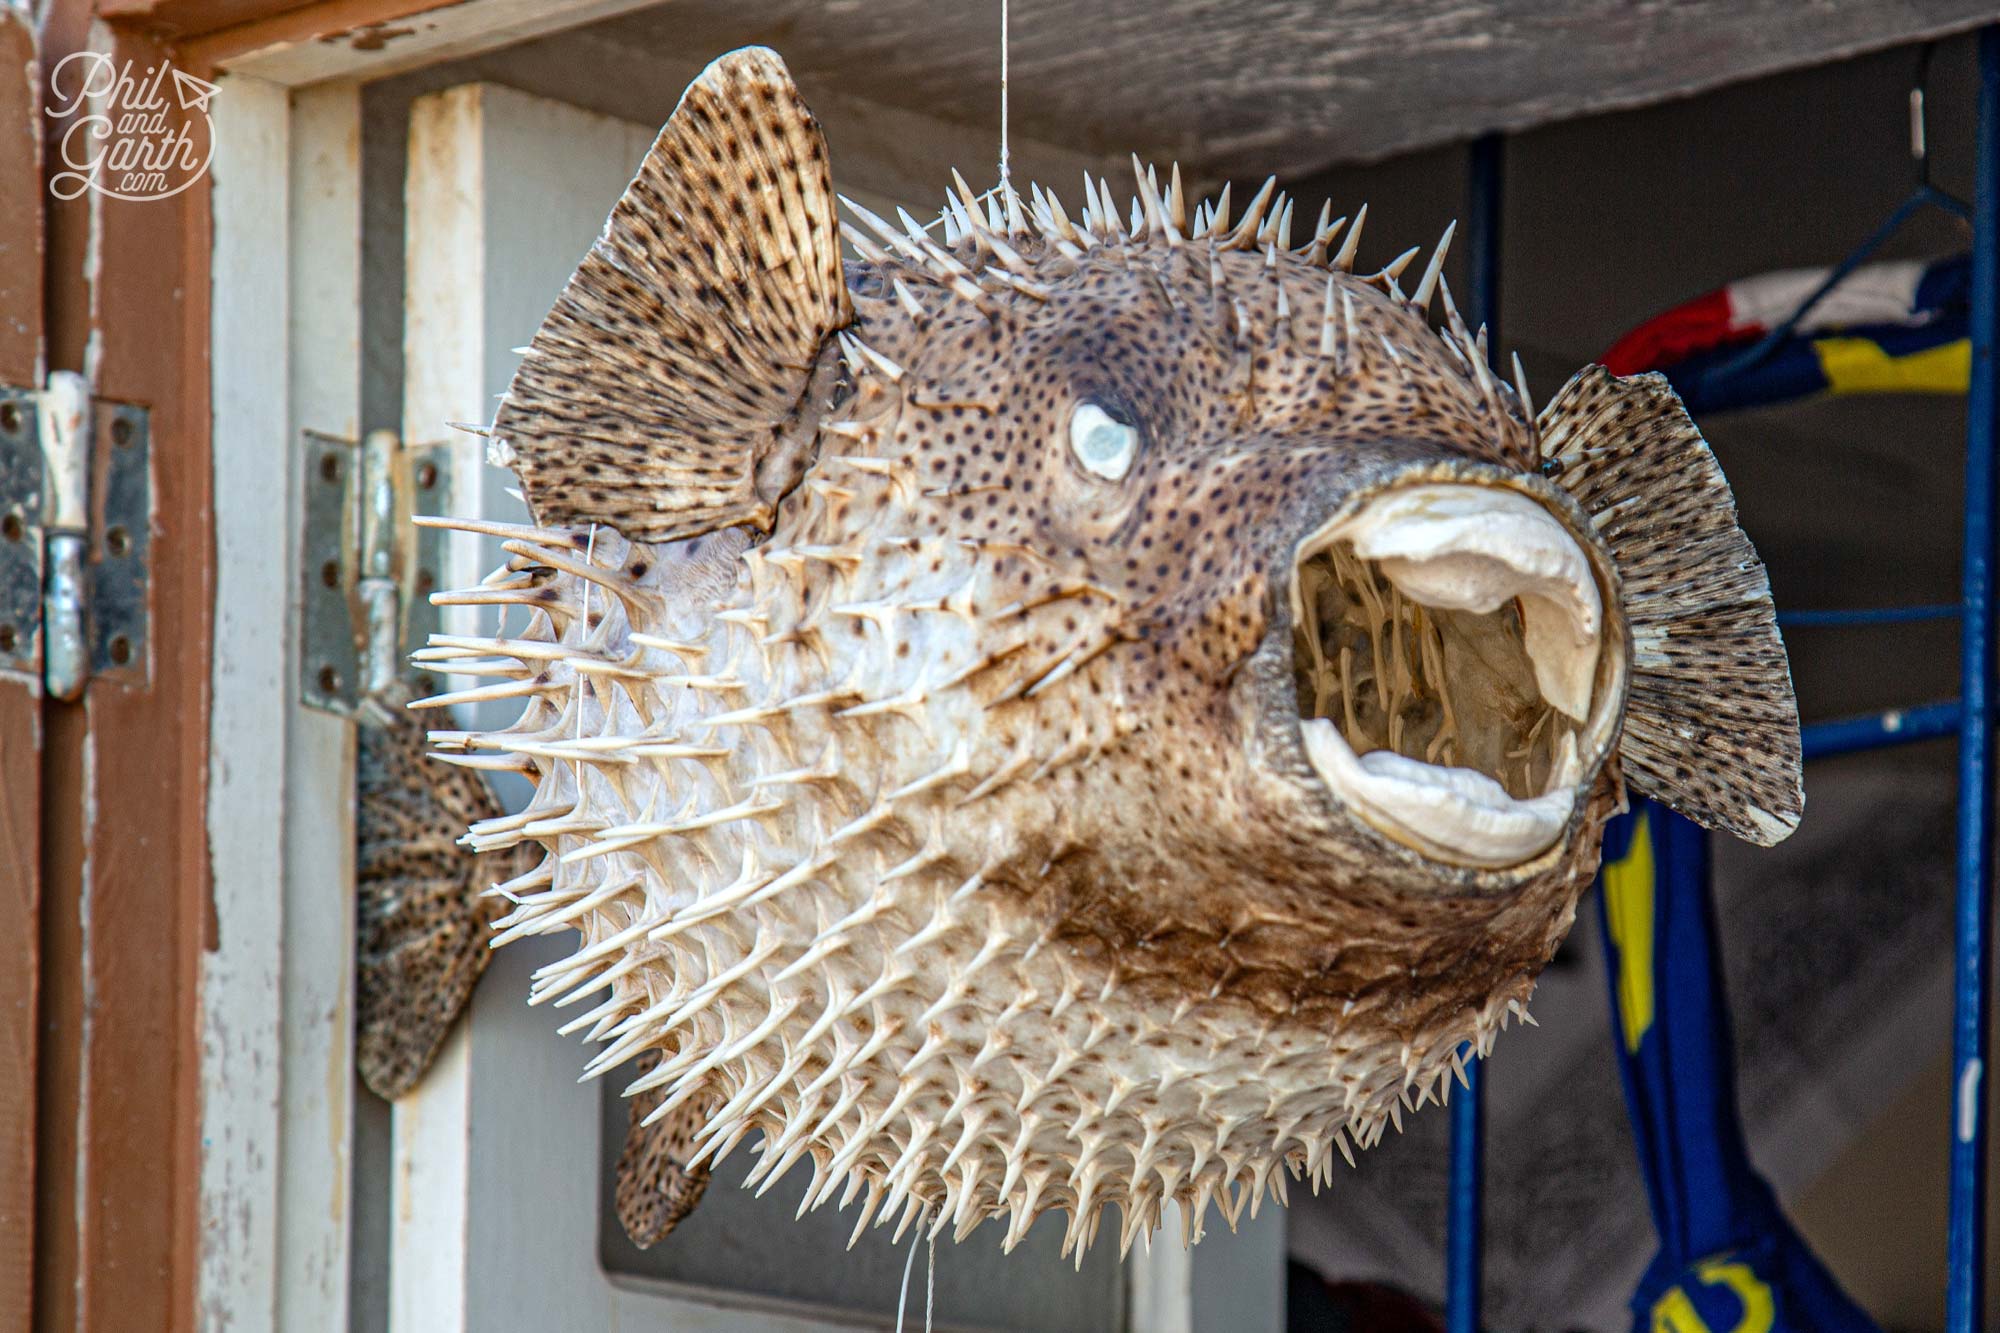 An inflated pufferfish for sale, so ugly!